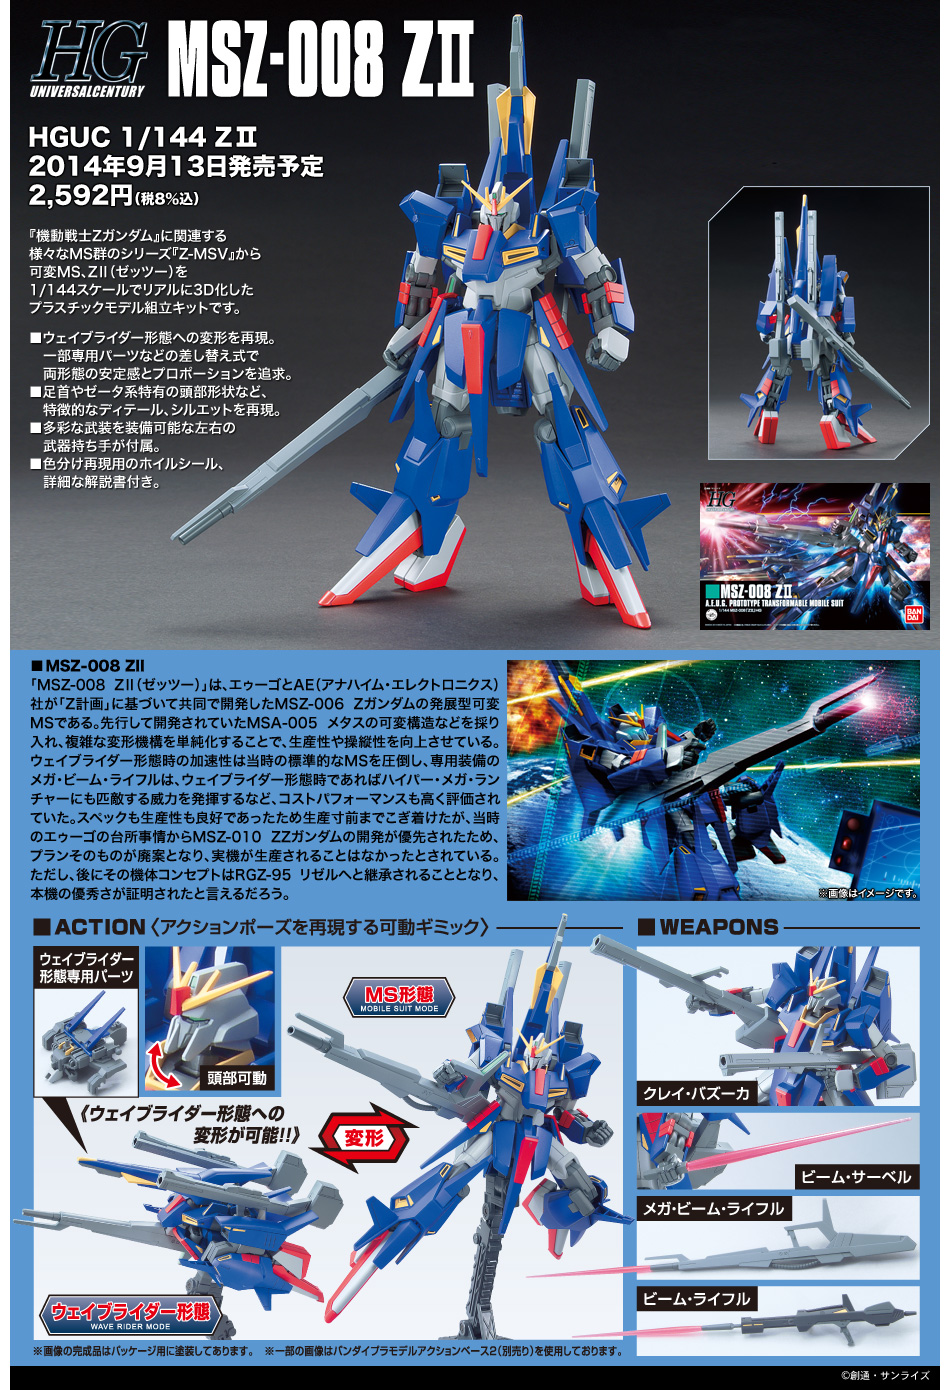 HGUC 1/144 MSZ-008 ZII: UPDATE Official Promotional Posters, Info 